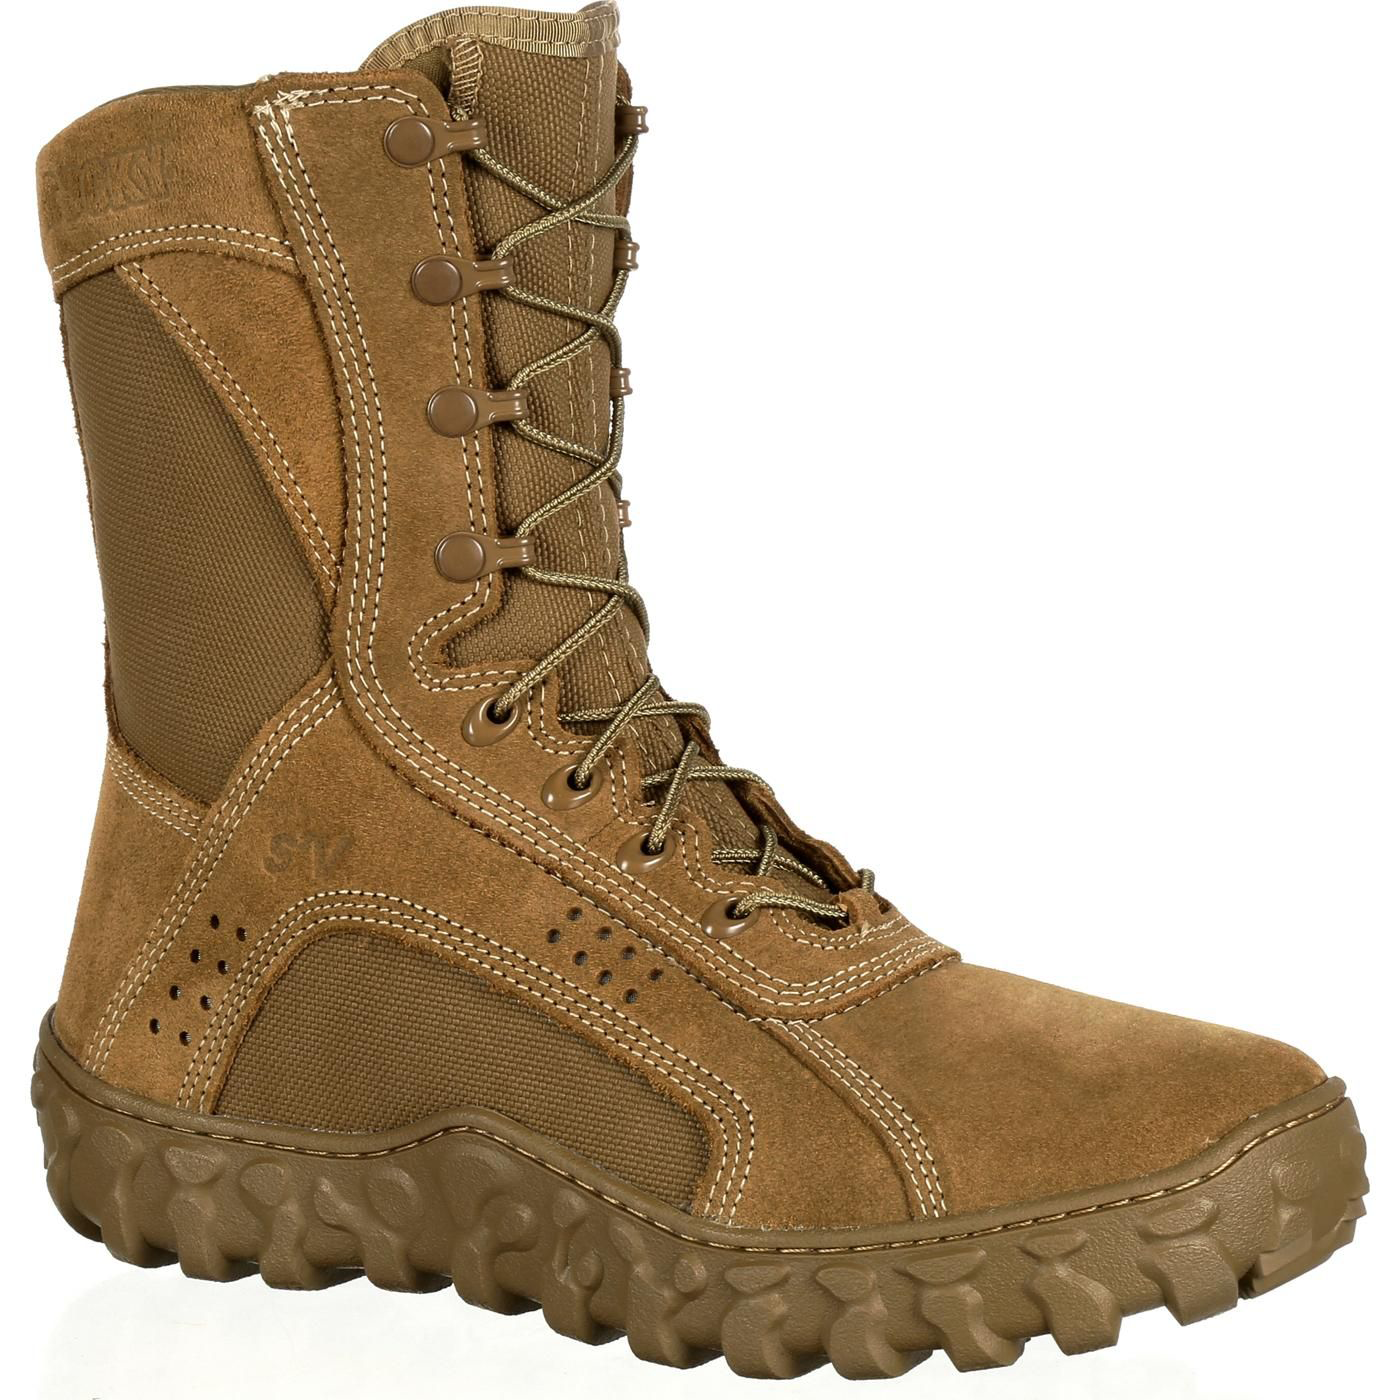 Rocky S2V Tactical Military Boots for Men - Coyote Brown - 6M